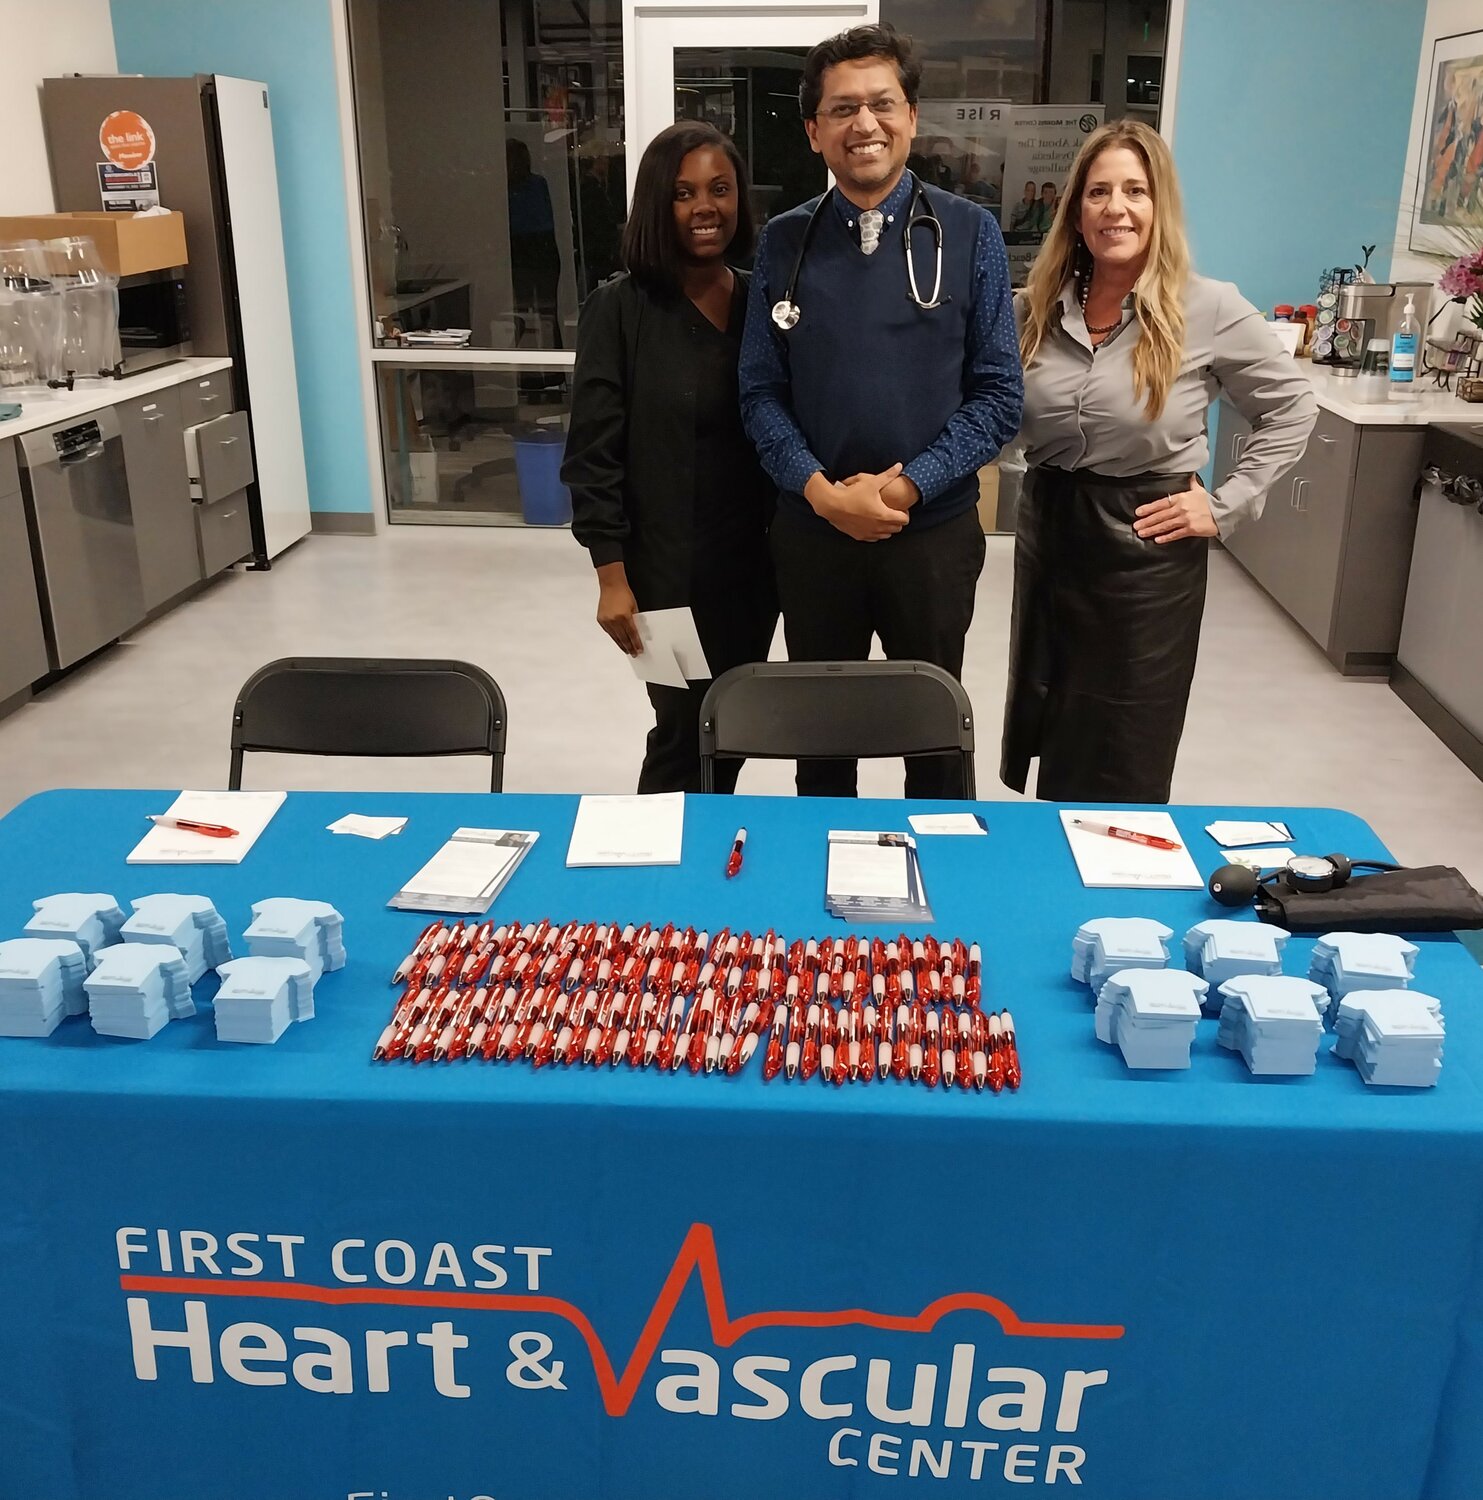 The team from First Coast Heart & Vascular Center at the EnterCircle Business Expo.